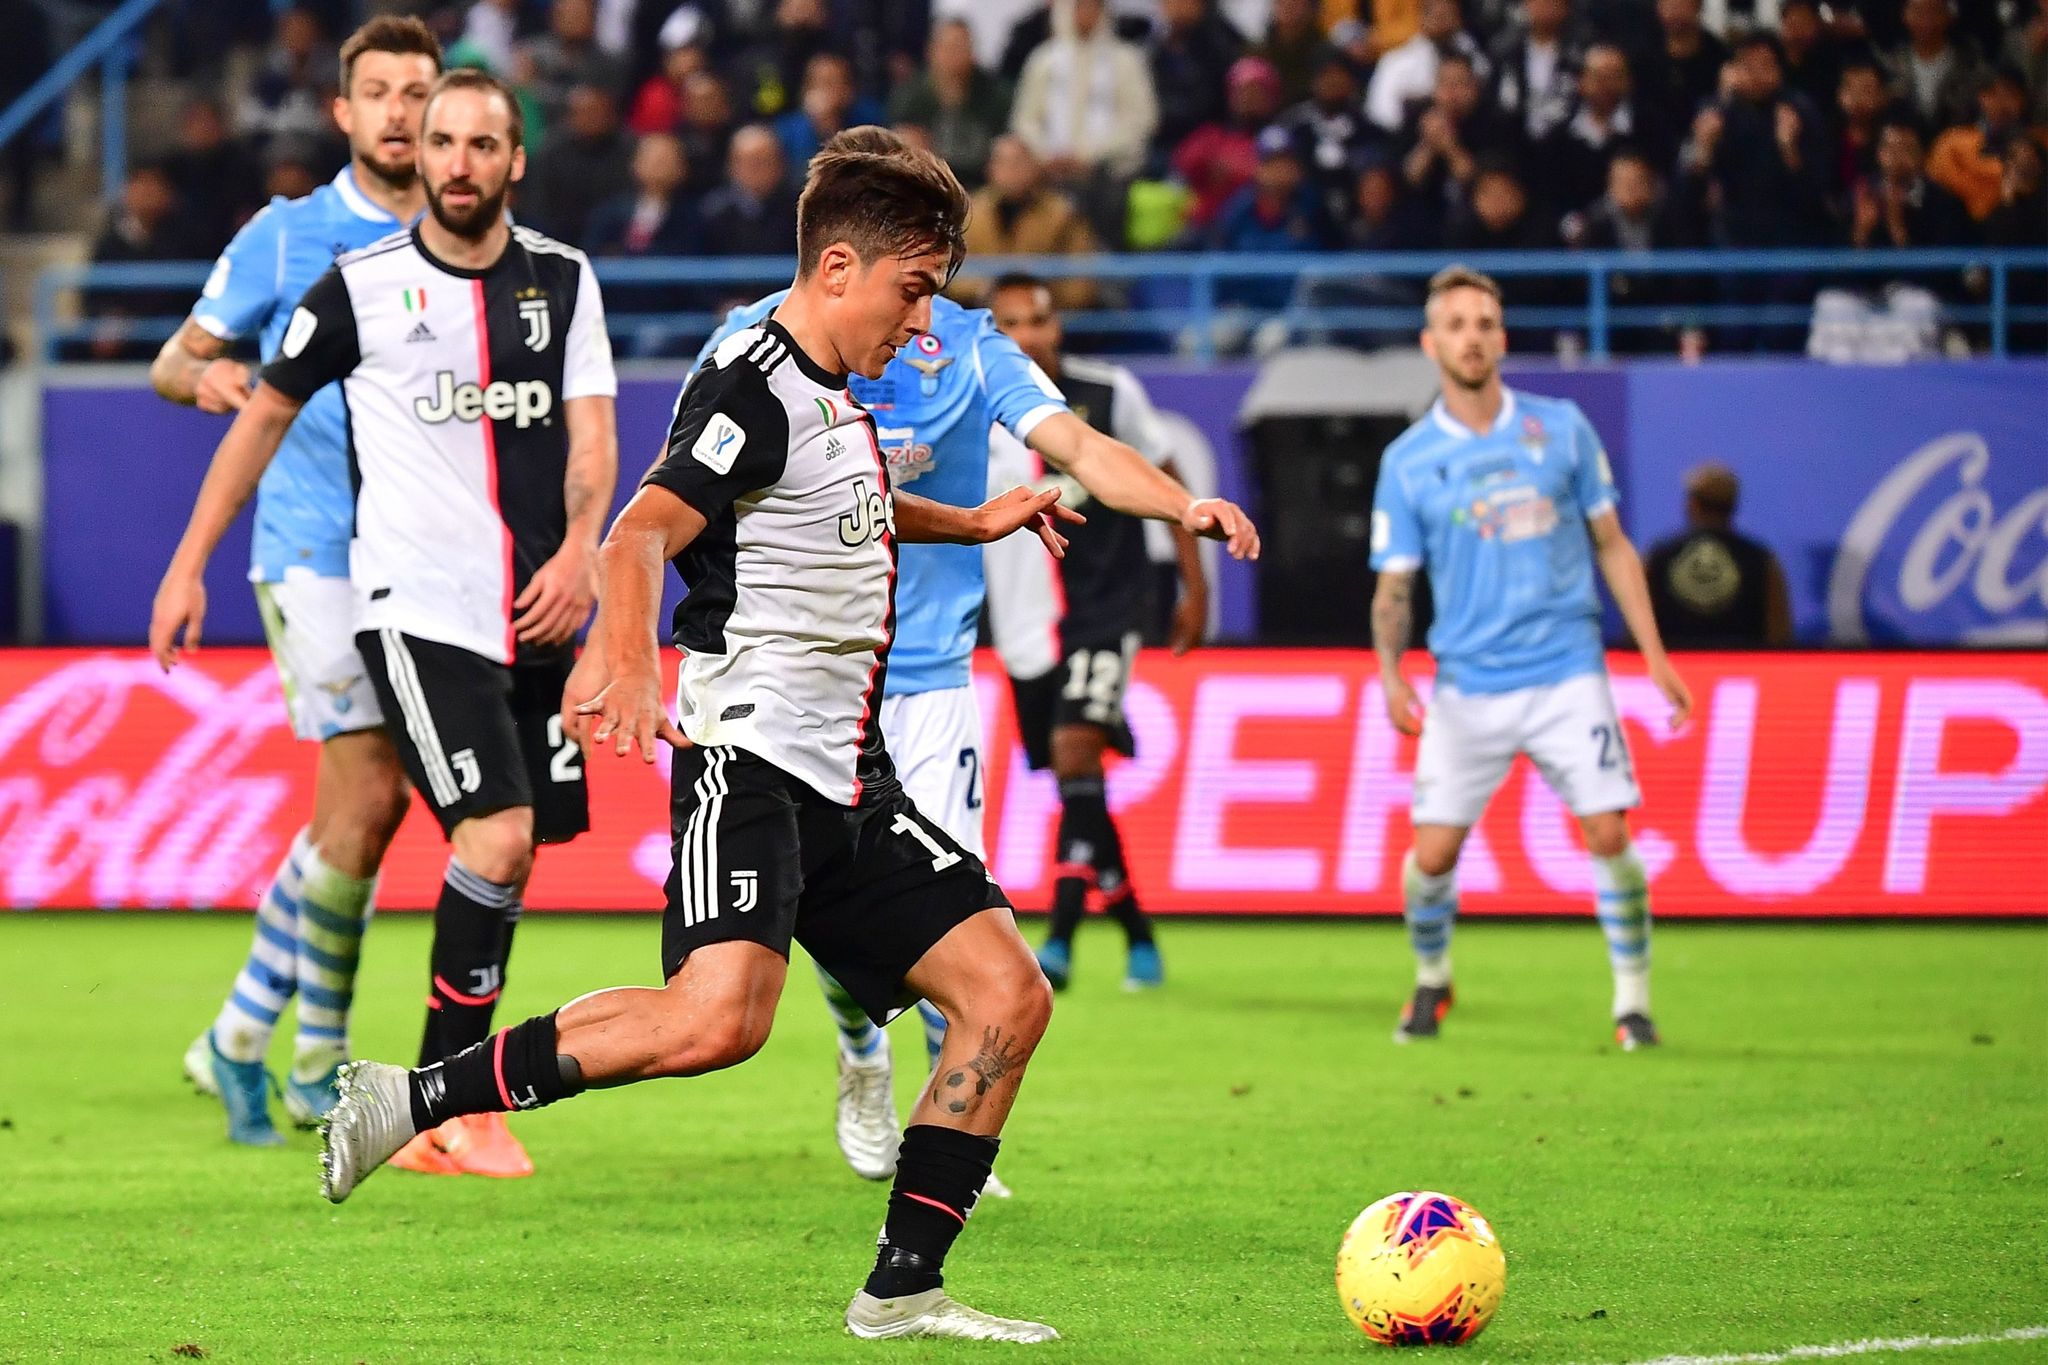 Juventus Argentine forward Paulo <HIT>Dybala</HIT> shoots to score during the Supercoppa Italiana final football match between Juventus and Lazio at the King Saud University Stadium in the Saudi capital Riyadh on December 22, 2019. (Photo by GIUSEPPE CACACE / AFP)